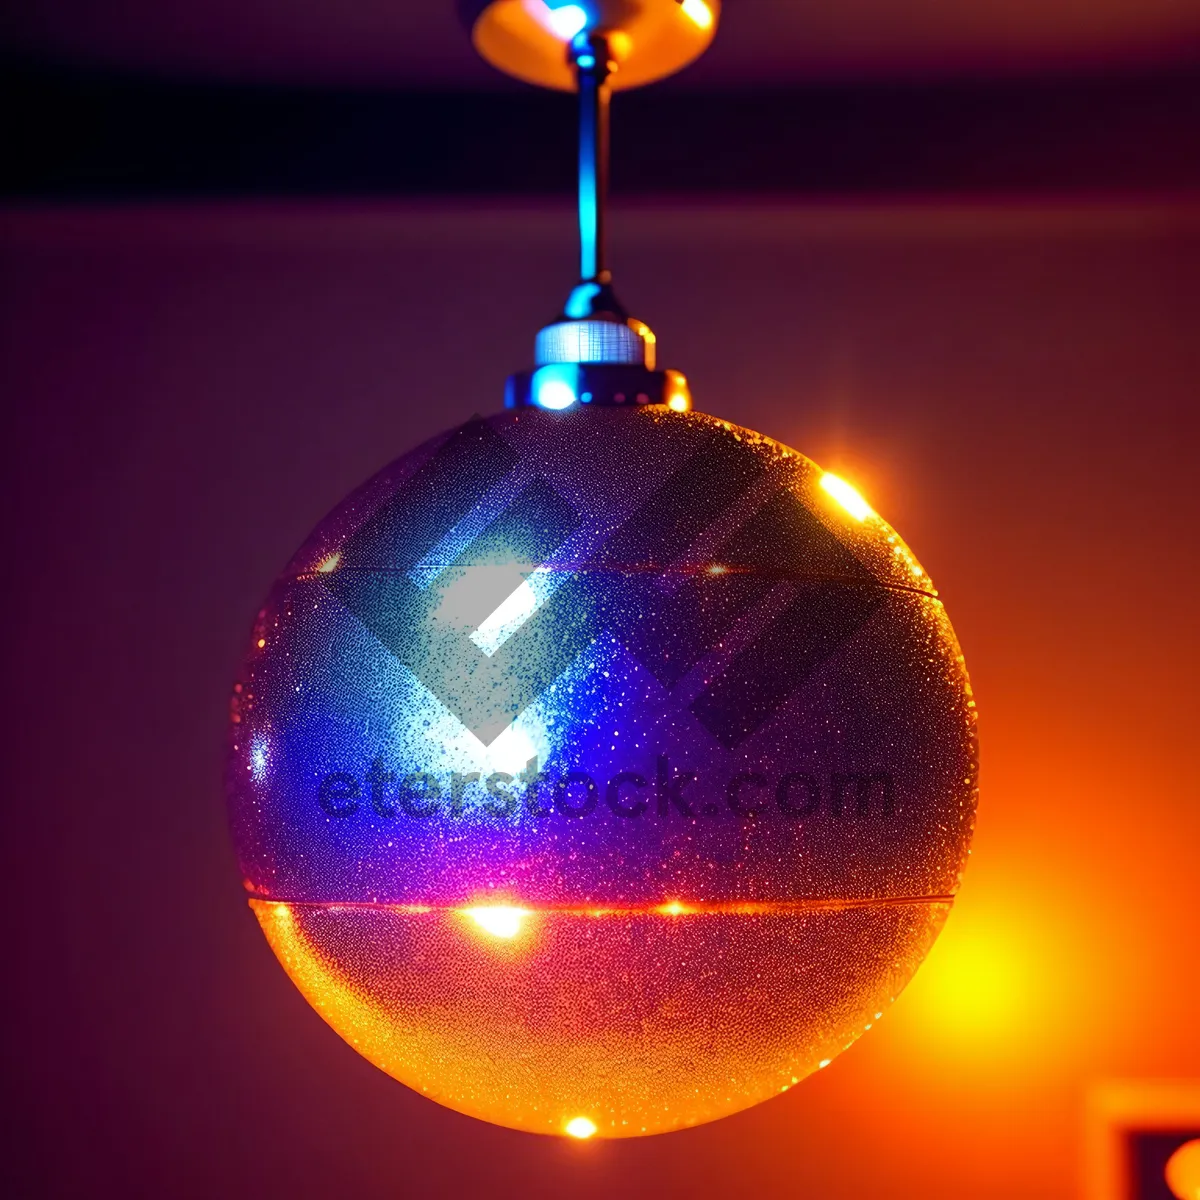 Picture of Festive Holiday Bauble Shimmering with Celebration